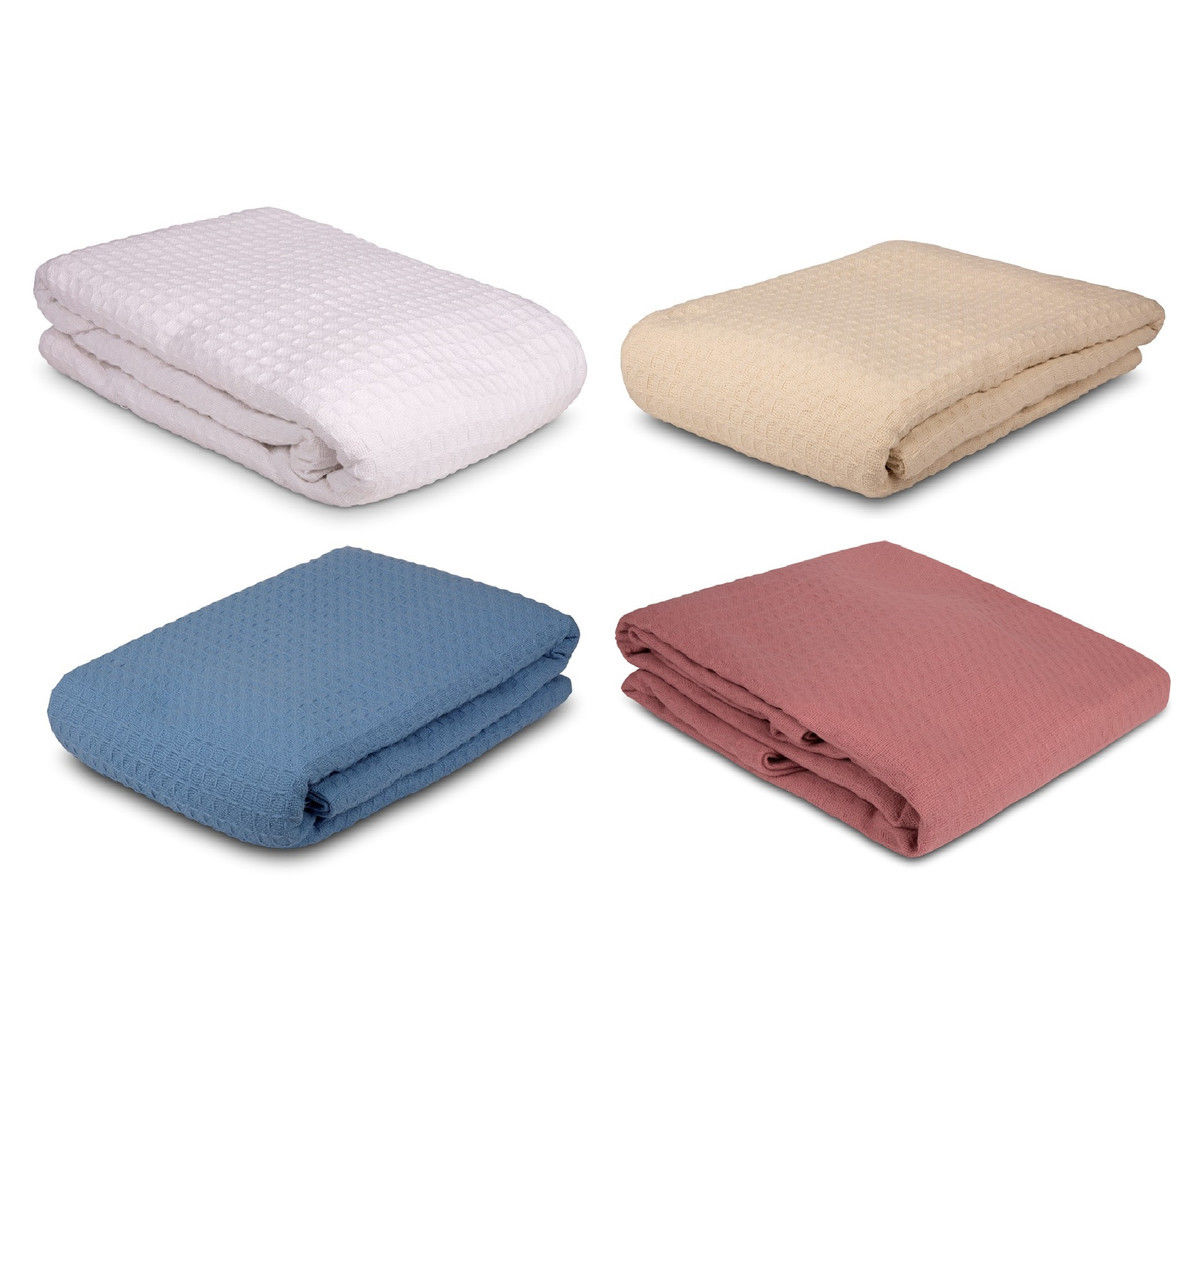 What industries are ideal for waffle weave blankets?